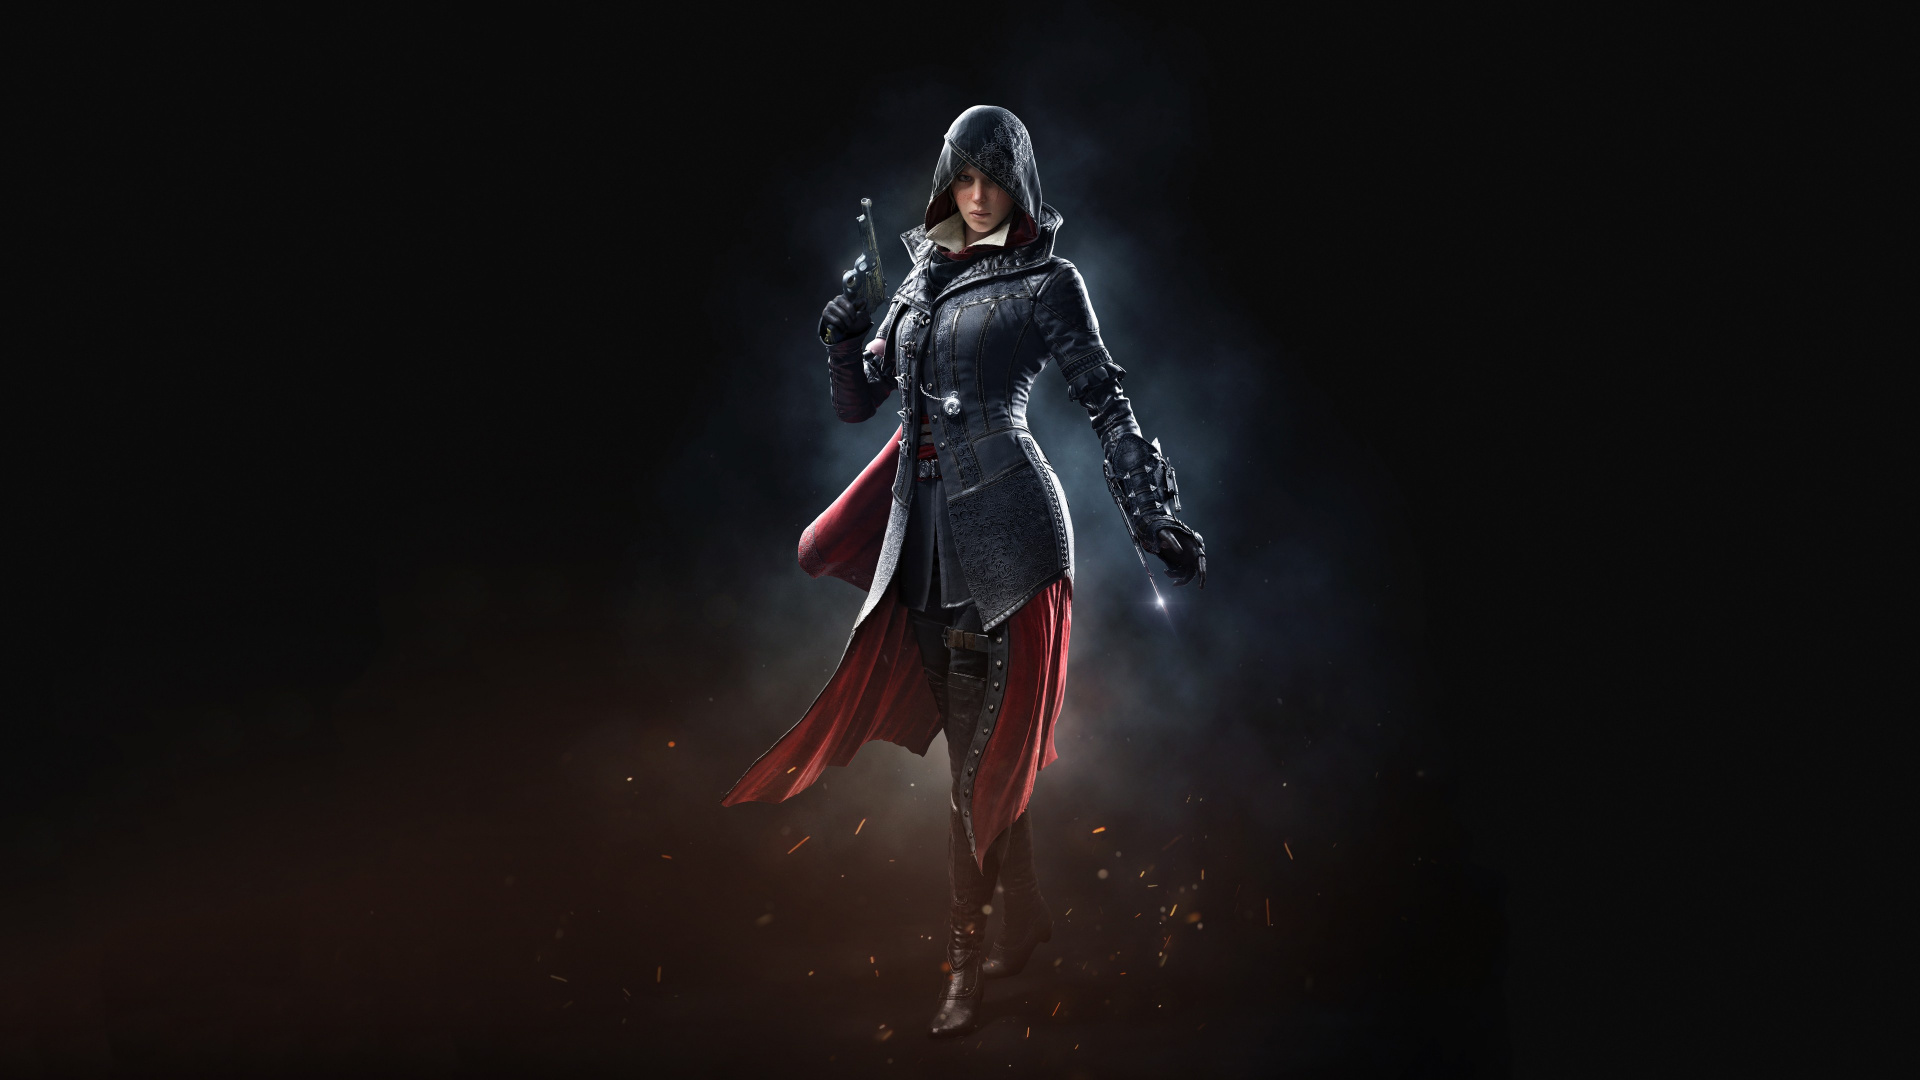 Assassins Creed Syndicat, Assassins Creed, Obscurité, Superhero, Figurine. Wallpaper in 1920x1080 Resolution